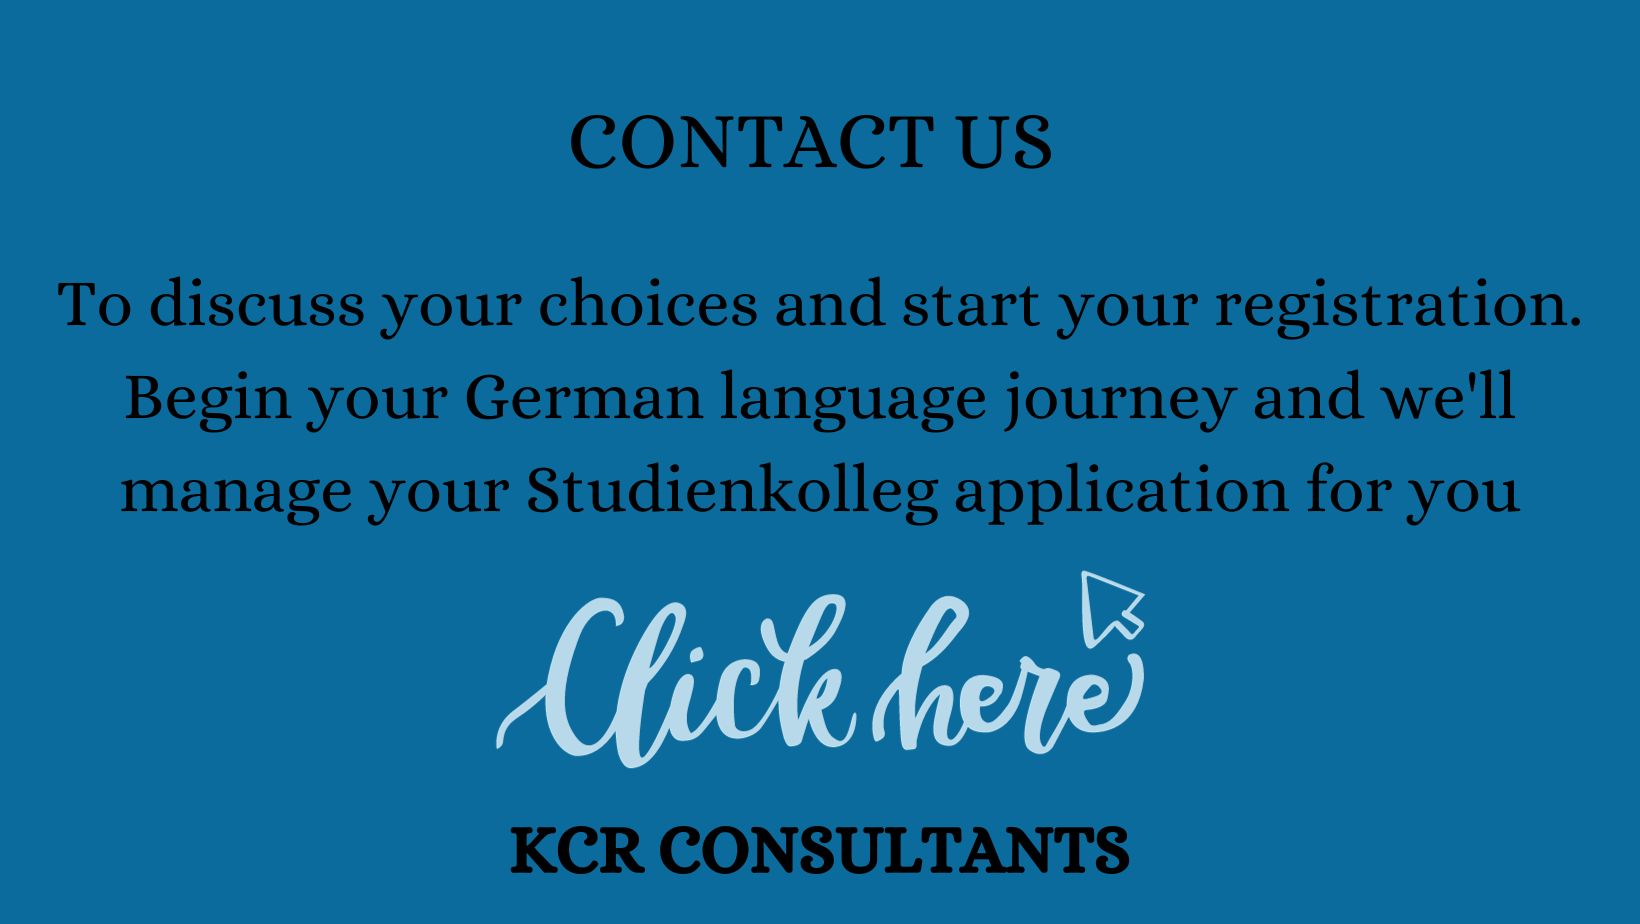 Best Studienkolleg at the BSIC, Presented by KCR CONSULTANTS - CONTACT US